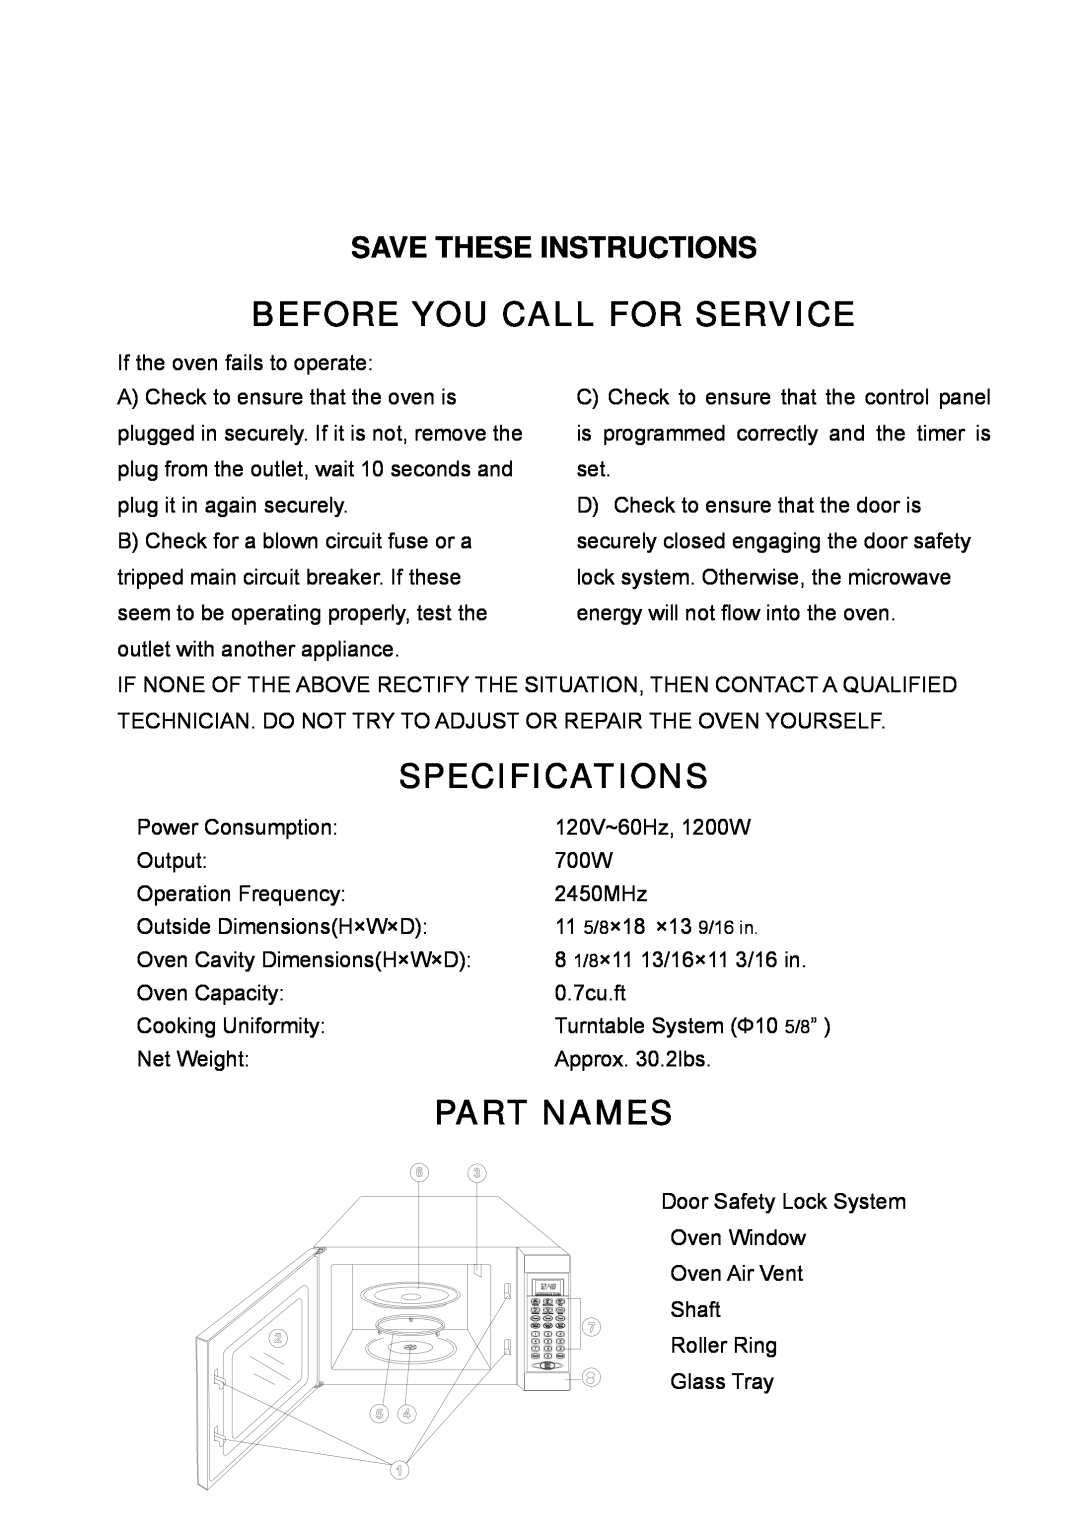 Tappan TM7050S owner manual Before You Call For Service, Specifications, Part Names, Save These Instructions 